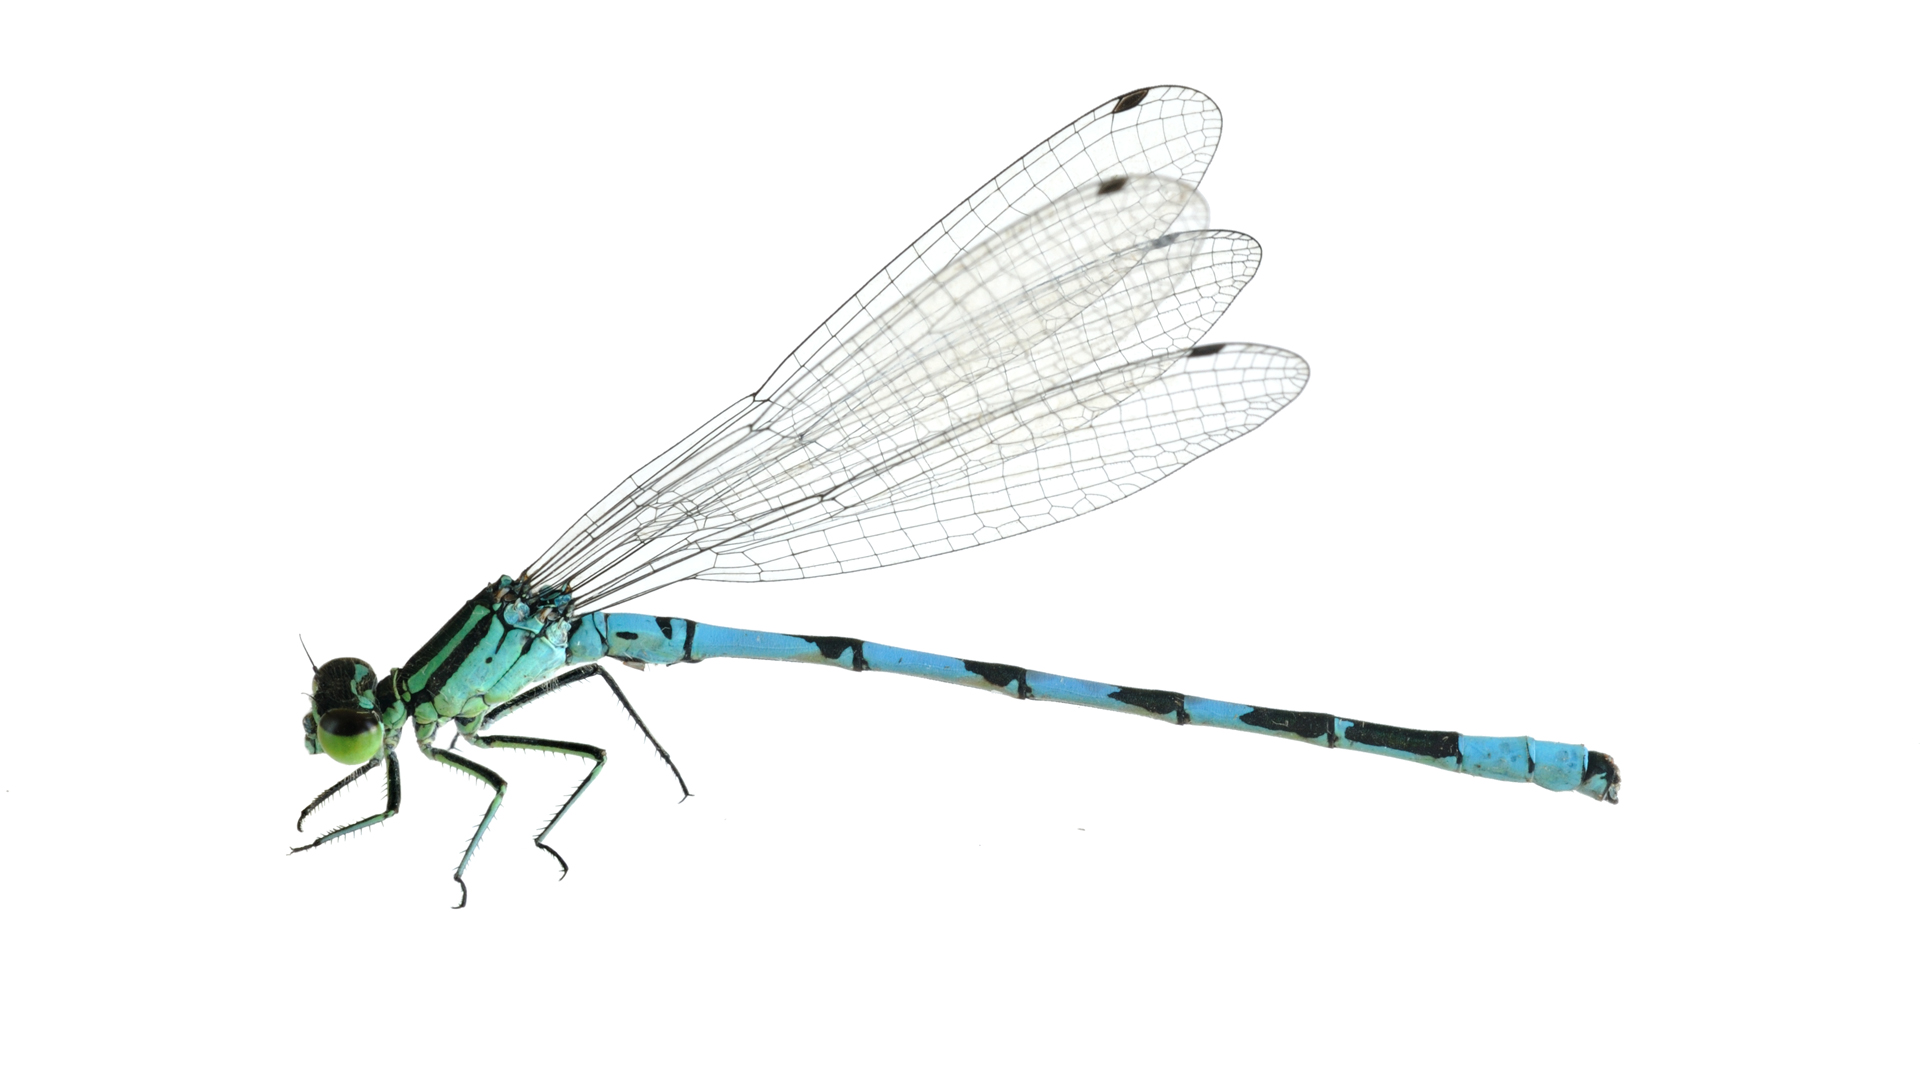 CONDENSED-dragonfly